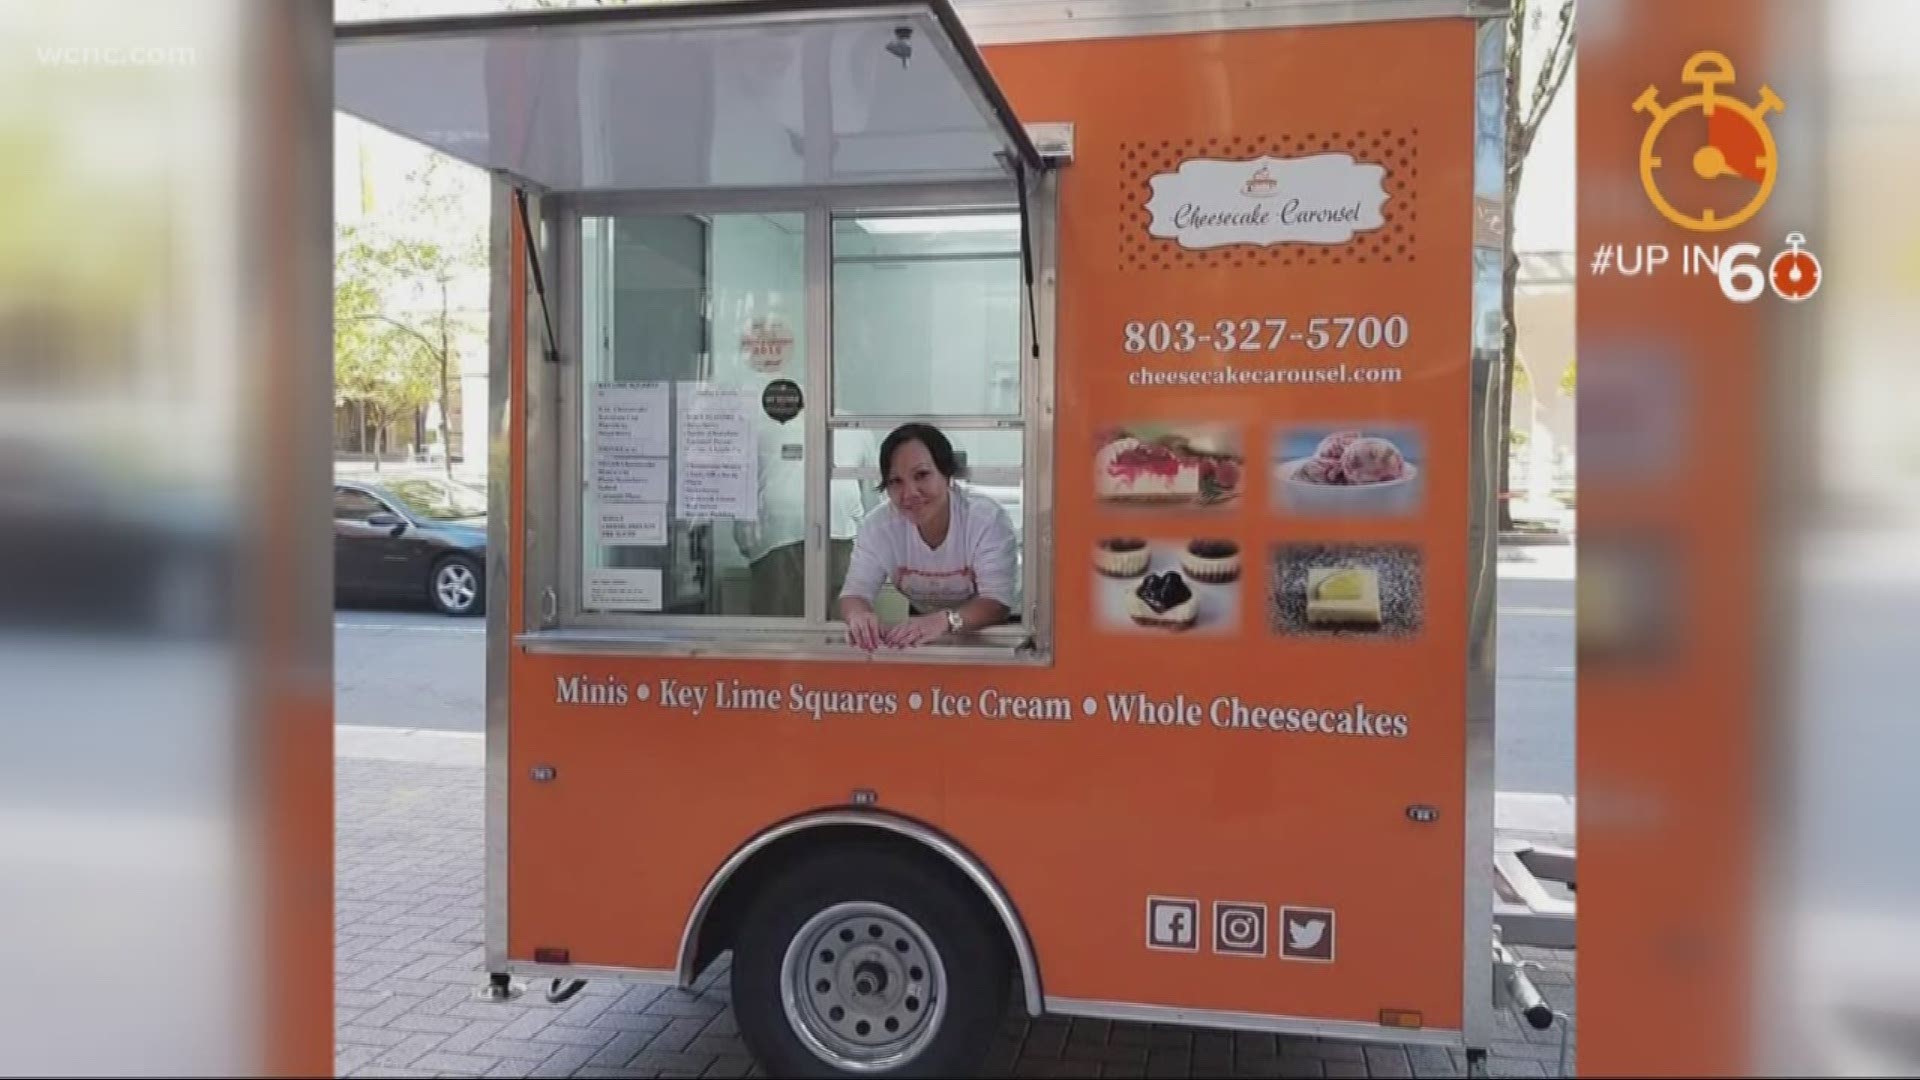 You can buy almost anything on the streets of uptown Charlotte. Even cheesecake at the Cheesecake Carousel food truck. What better time to try it than National Cheesecake Day?